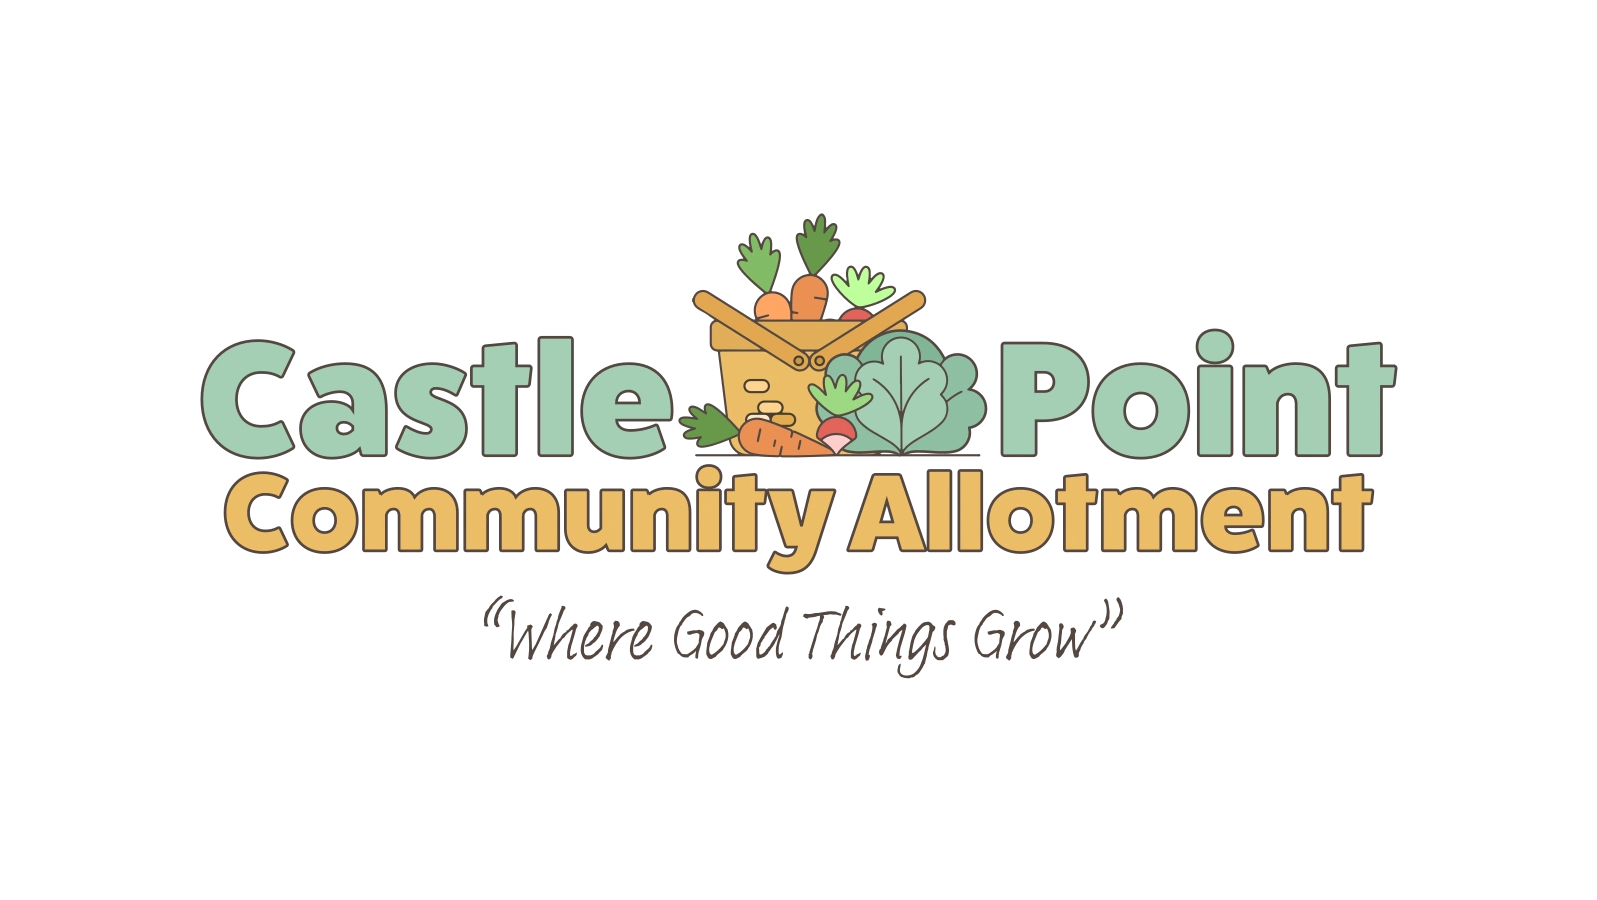 Castle Point Community Allotment
"Where Good Things Grow"